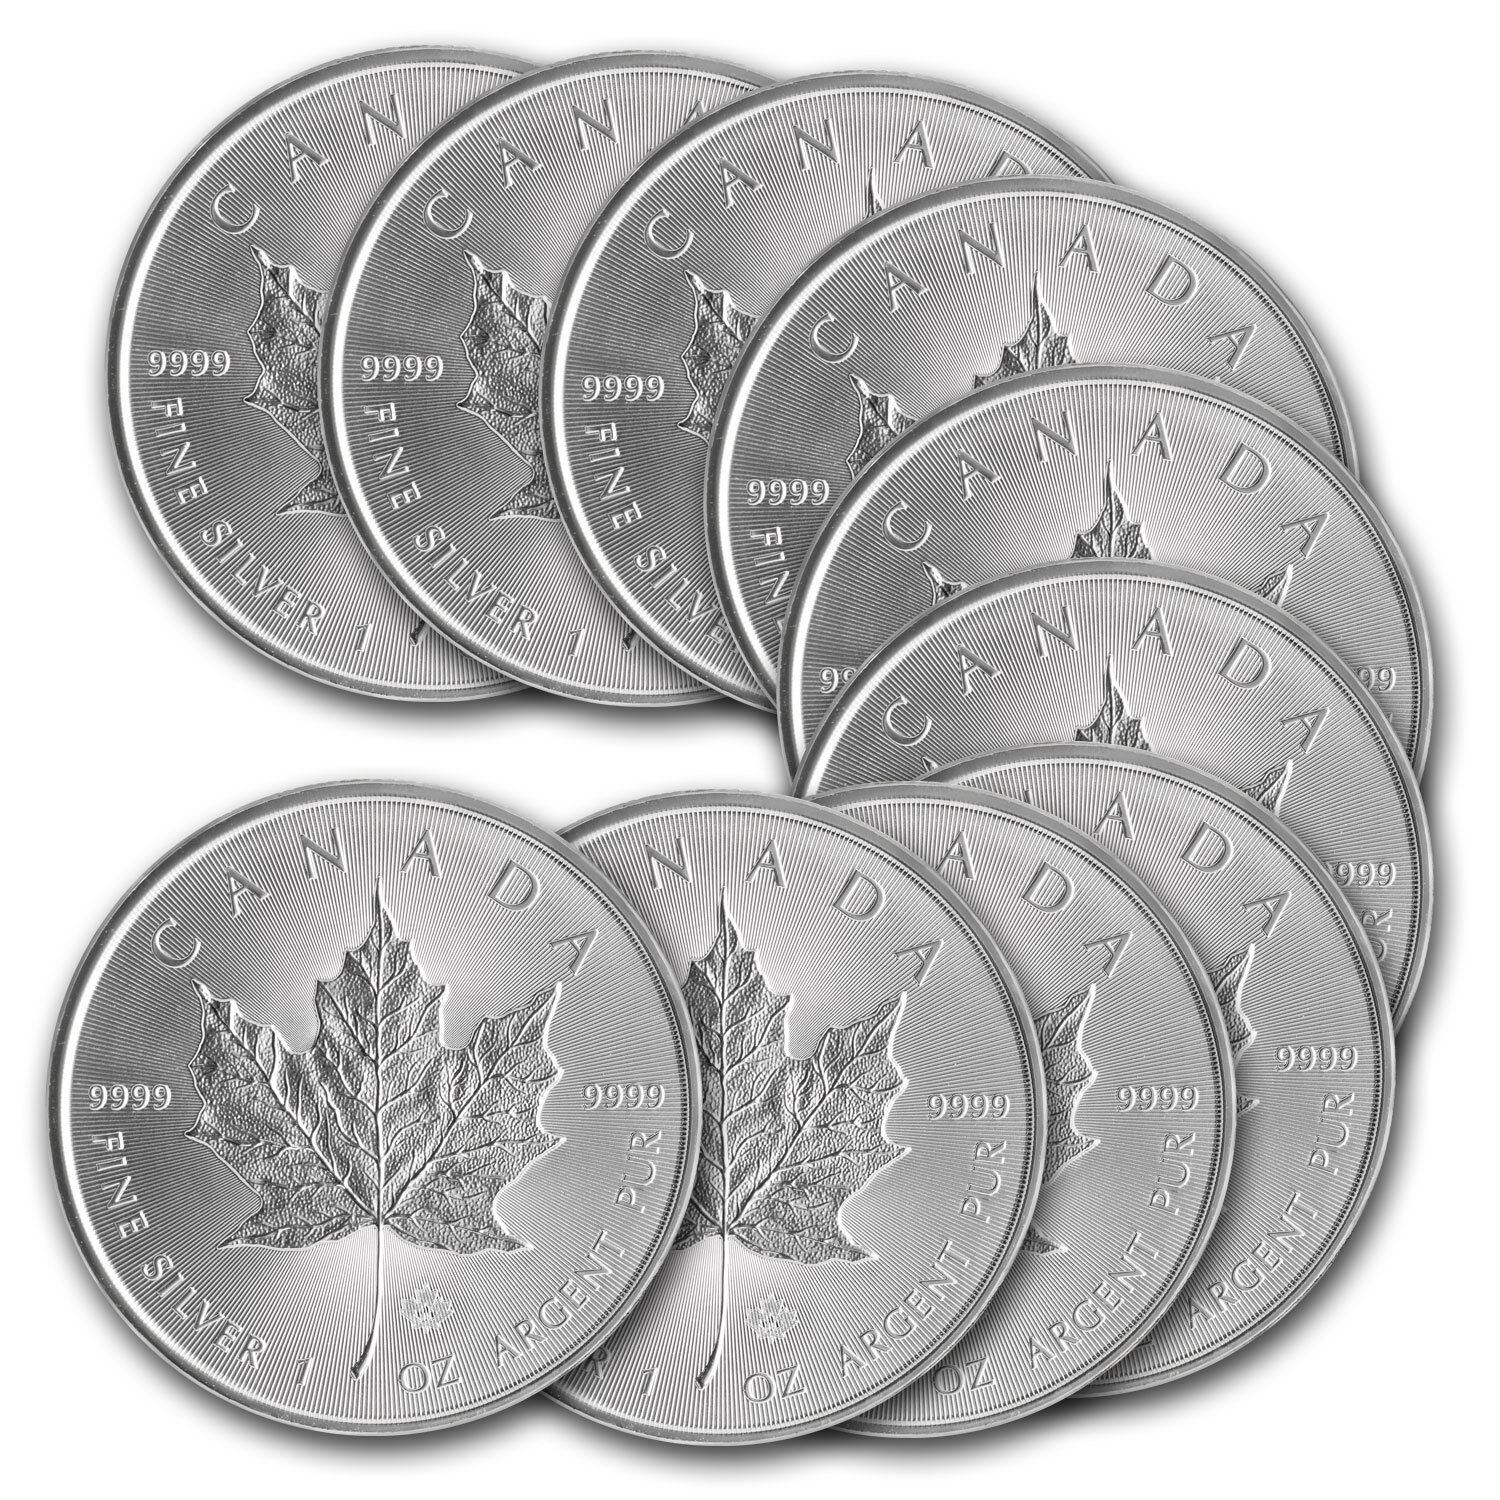 2014 1 oz Silver Canadian Maple Leaf Coin - Lot of 10 - SKU #79749